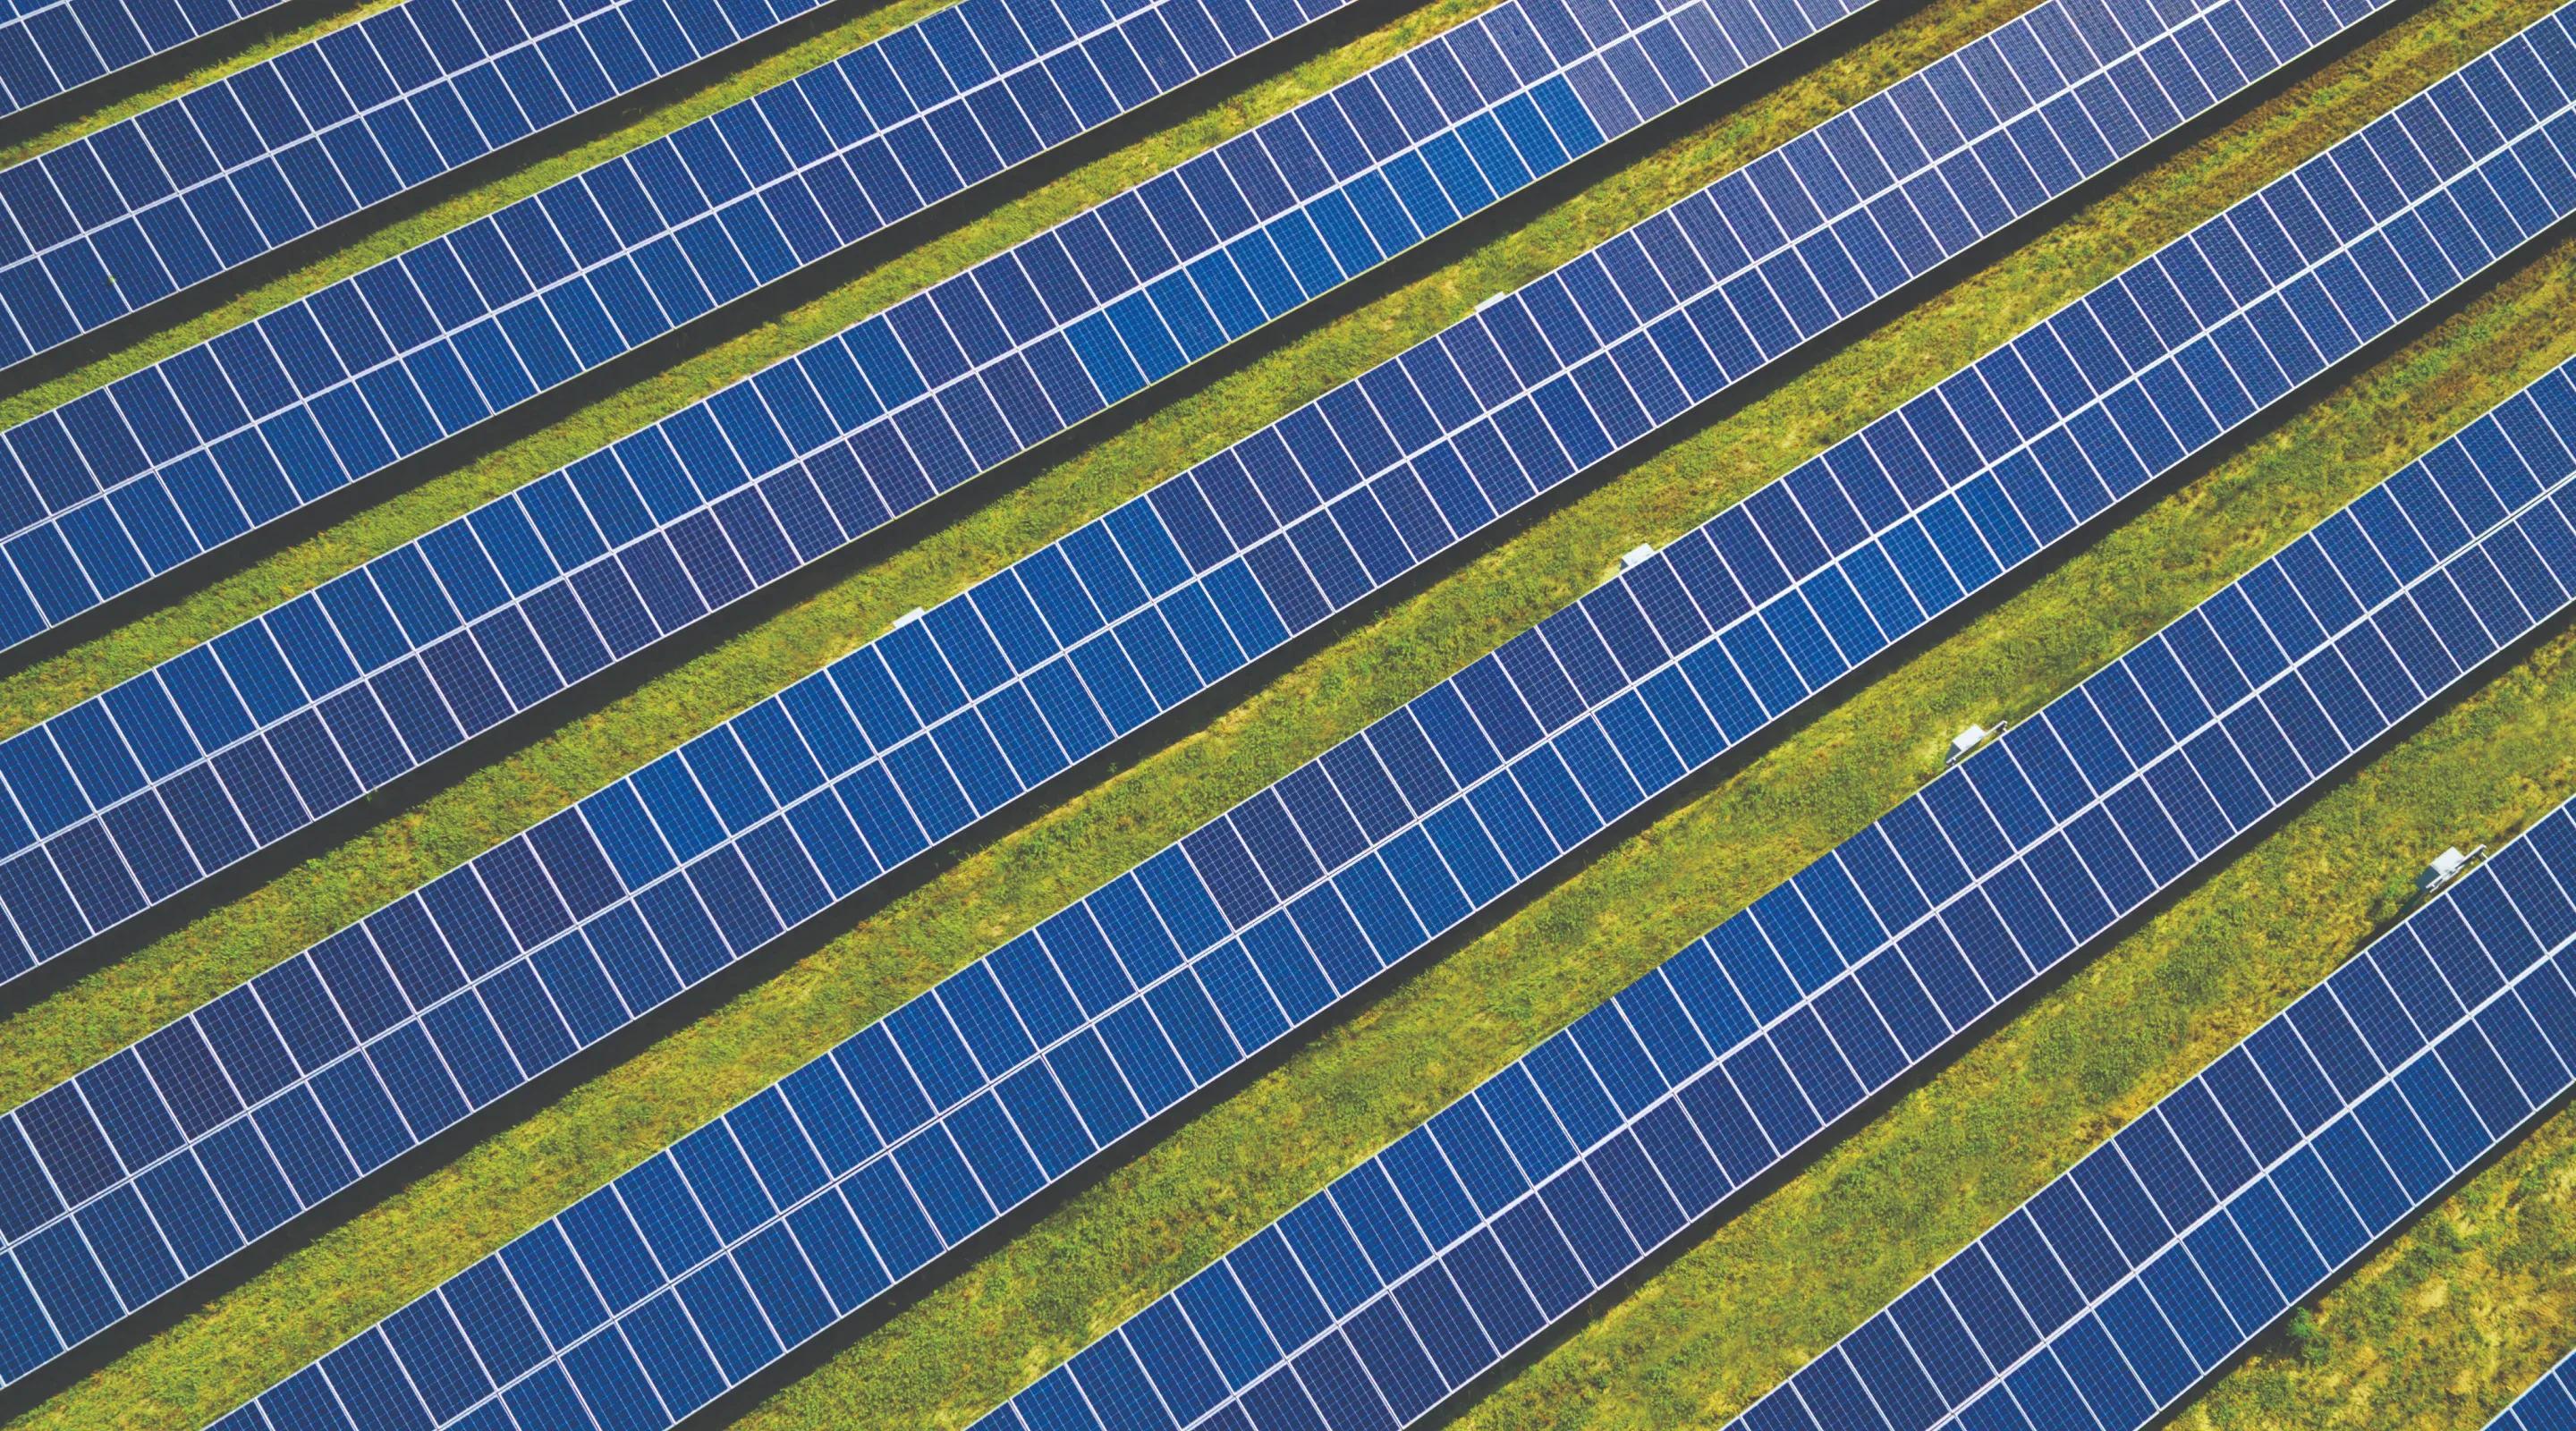 Image of rows of solar panel.